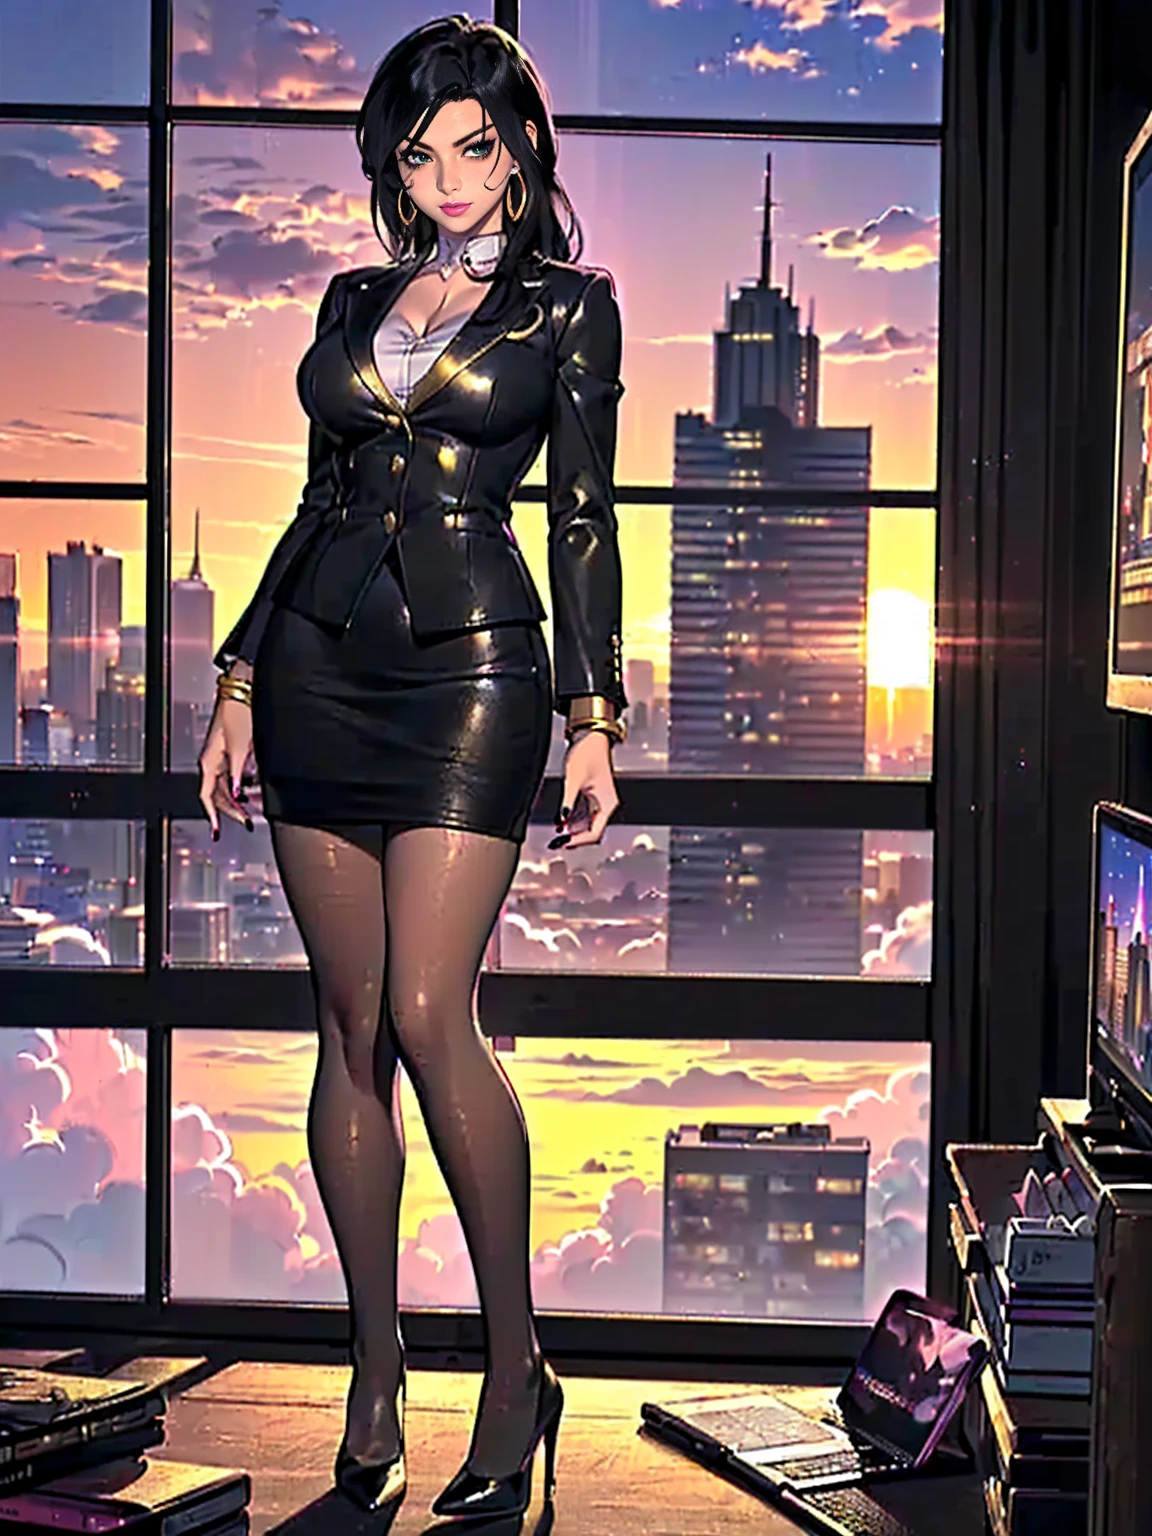 ((1girl, solo ,alone, (masterpiece, standing, best quality, (shoko_sugimoto, black eyes, long hair, black hair, standing), painted nails, gold bracelets, ruby earrings)), ((solo, 1woman, pink lipstick, Extremely detailed, ambient soft lighting, 4k, perfect eyes, a perfect face, perfect lighting, a 1girl)), austere, ((solo, (1woman, pink lipstick), Extremely detailed, ambient soft lighting, 4k, perfect eyes, a perfect face, perfect lighting, a 1girl)), austere, ((Officelady, Black suit, Black tight skirt, White blouse, Black tights, High pumps with black heels, Office, lana, Beautiful woman, gazing at viewer, Looking here, hight resolution, top-quality, full body, (anime style), illustratio, office, penthouse, executive room, large window, landscape of a metropolis, sunset, clouds)), documents, books, table, shelves, pencil holder, computer